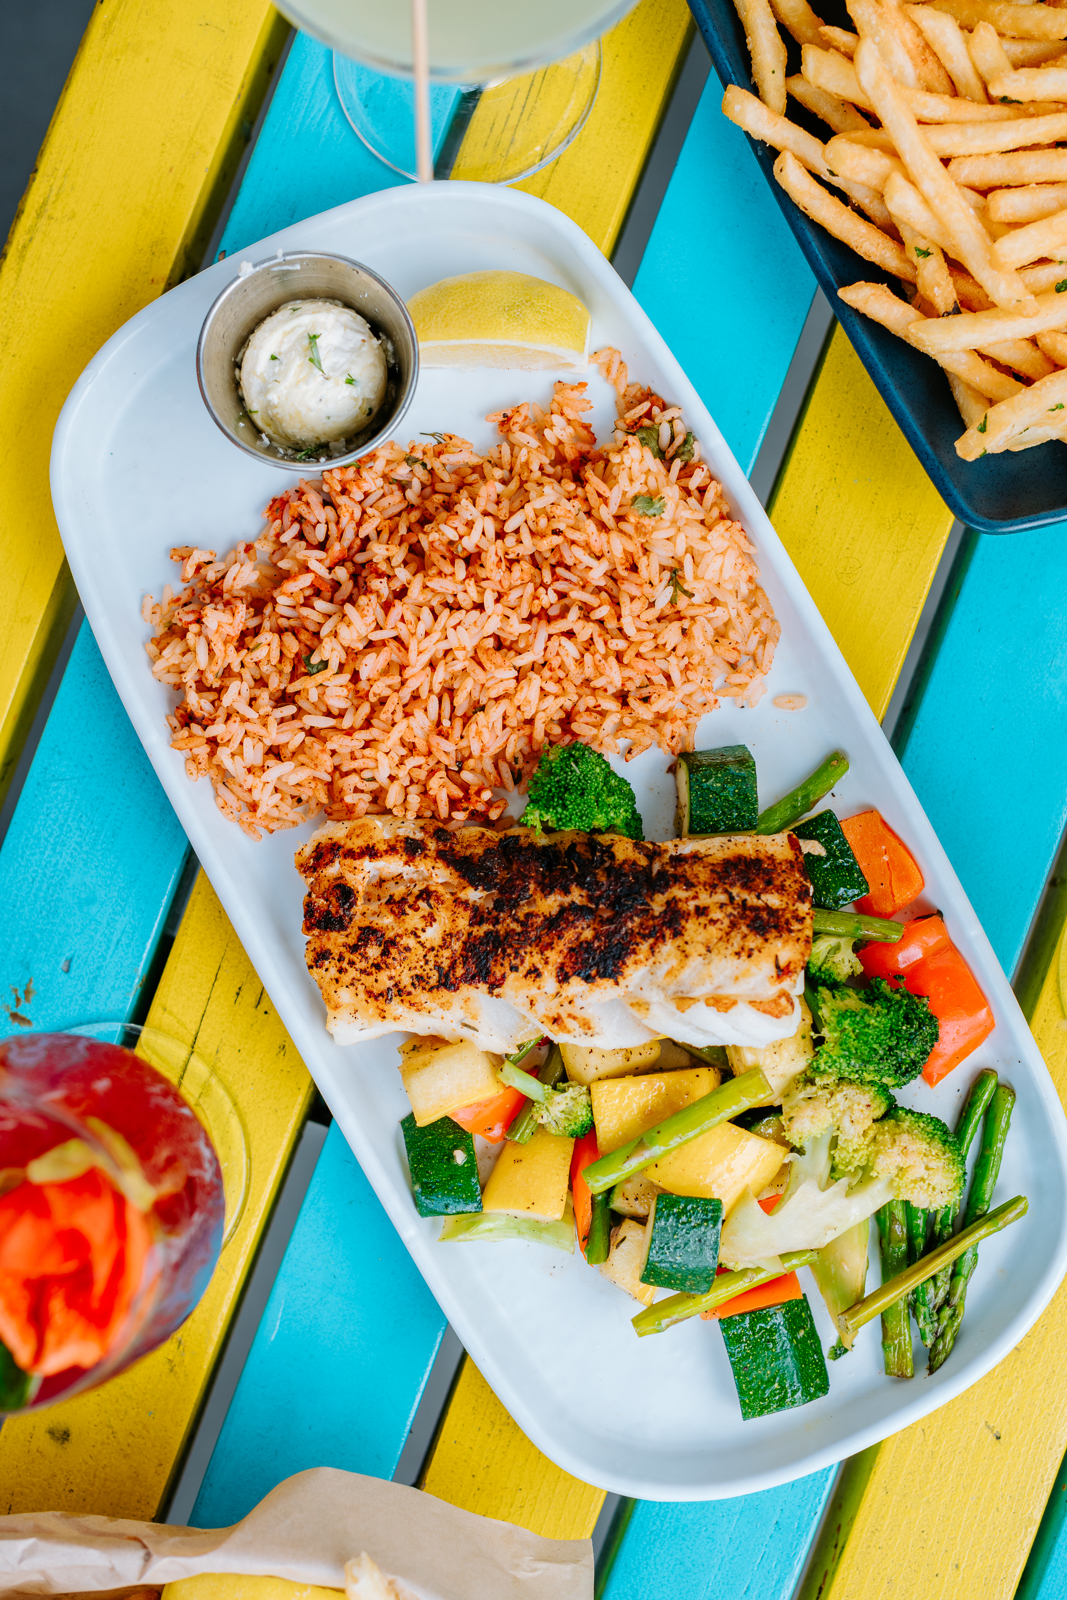 Food photography | West to East Coast with Hello Betty | A tray with rice, vegetables and grilled fish | Bethesda, MD | Oceanside, CA